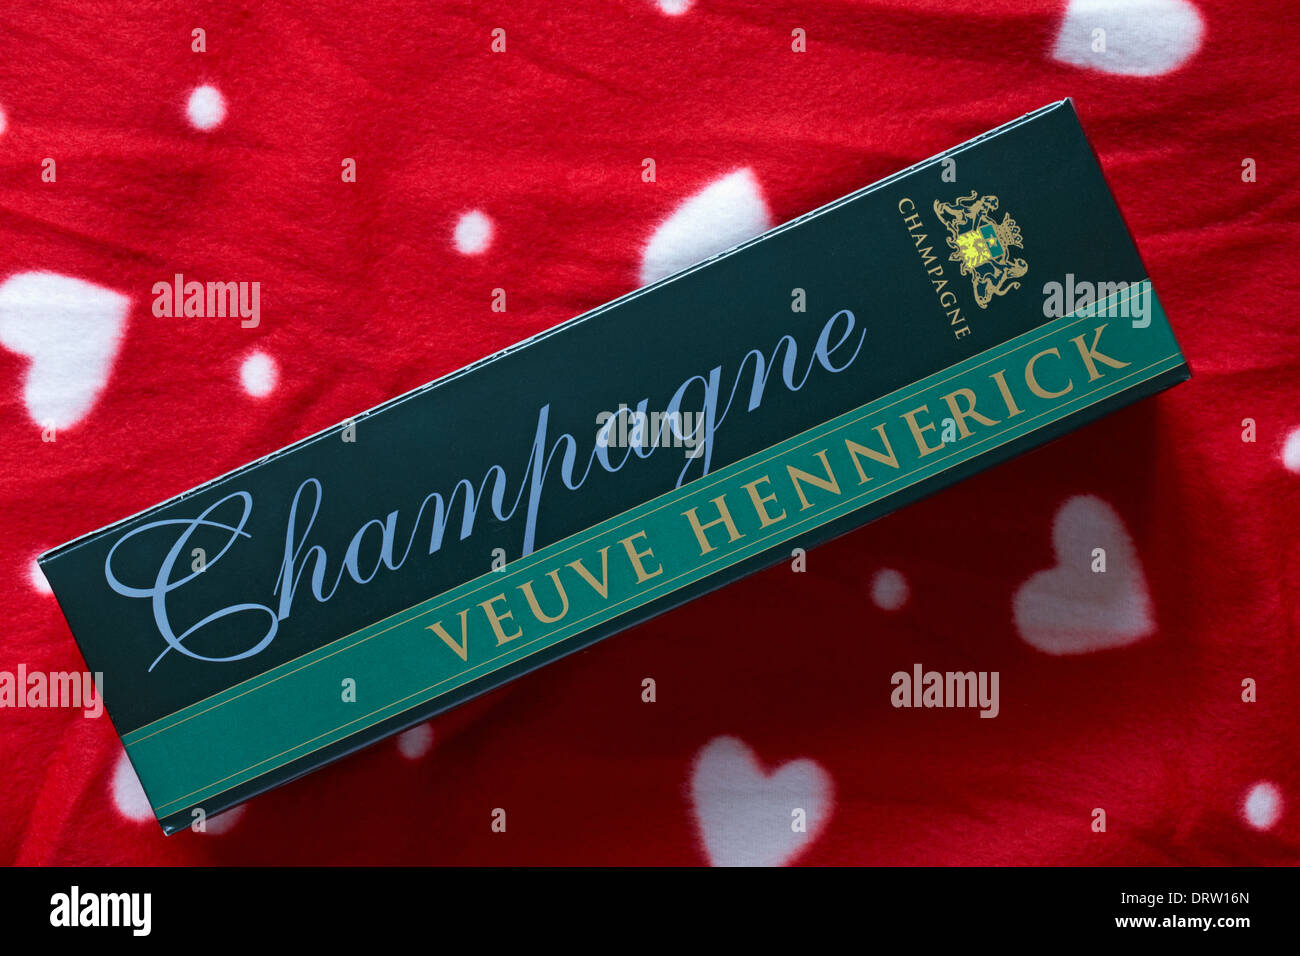 box of Veuve Hennerick Champagne set on red background with white hearts on Stock Photo